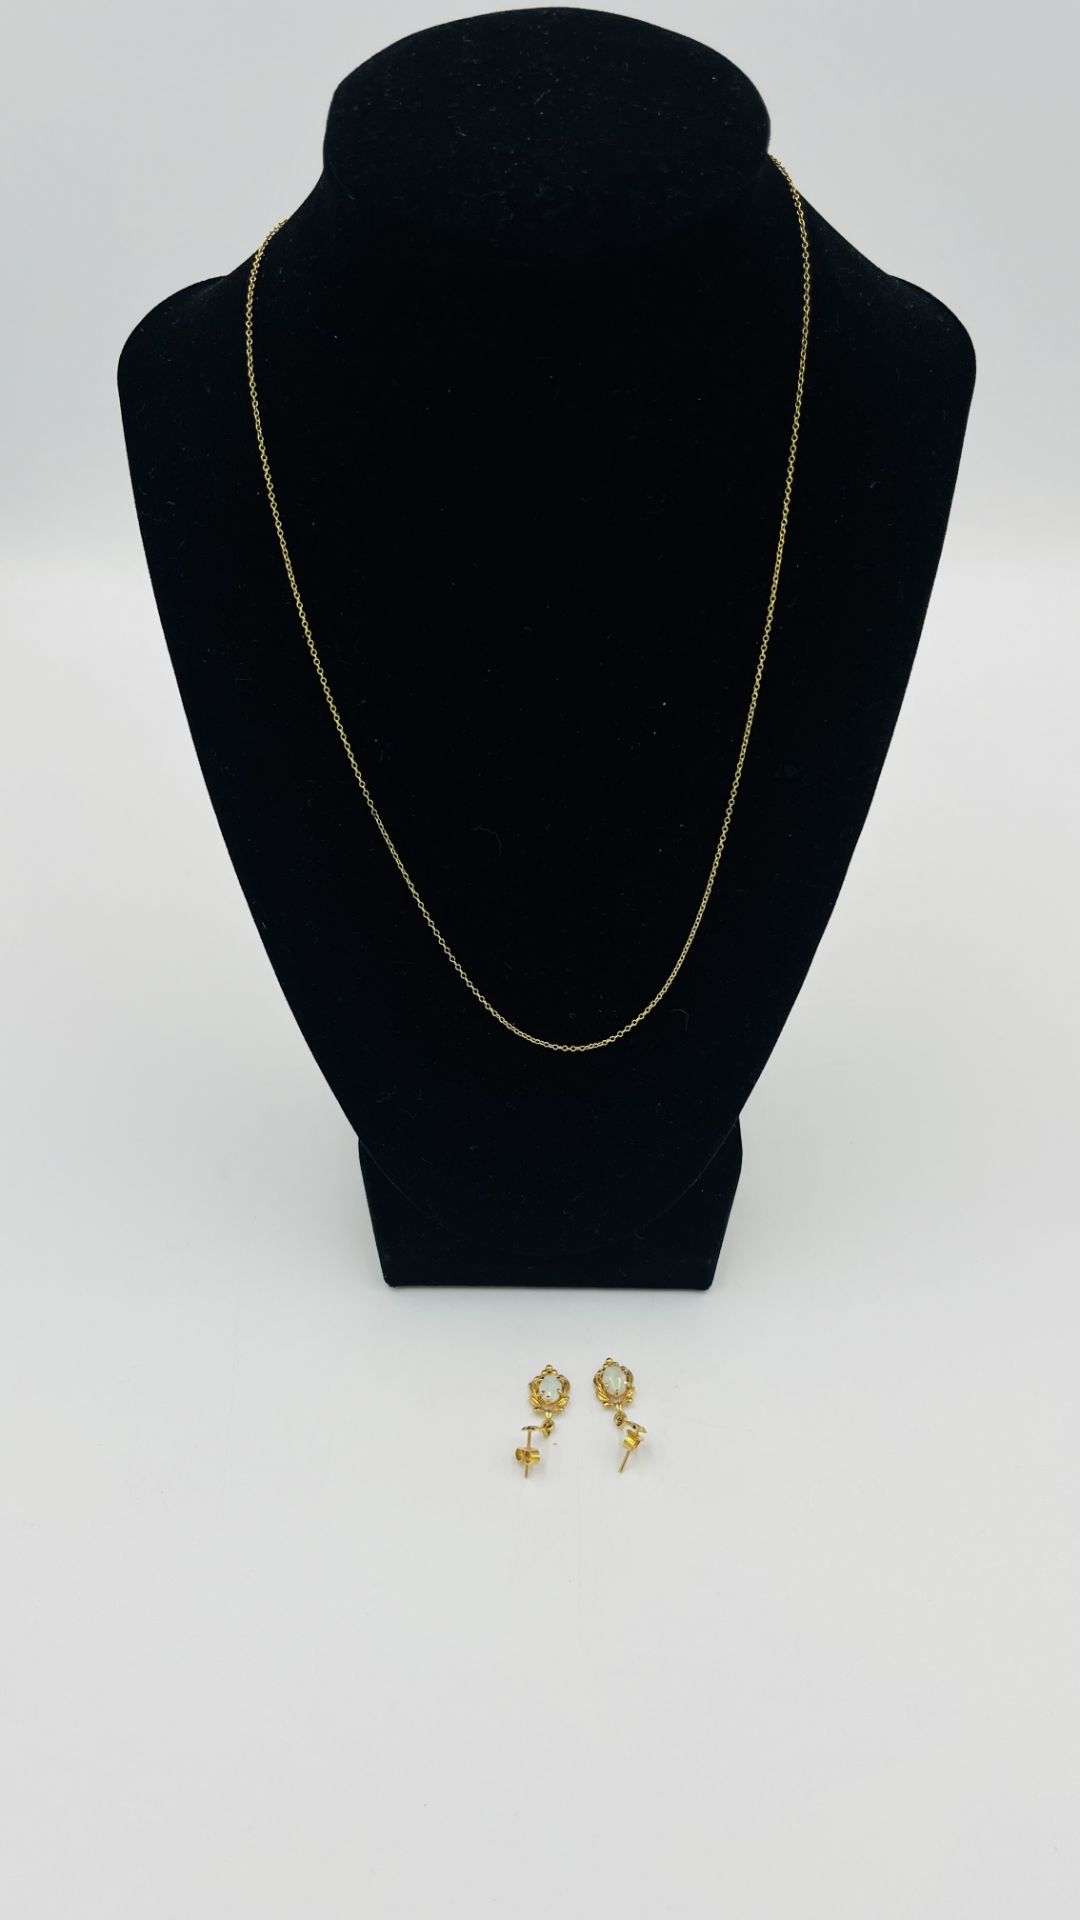 Pair of 9ct earrings together with a 9ct gold chain - Image 4 of 4